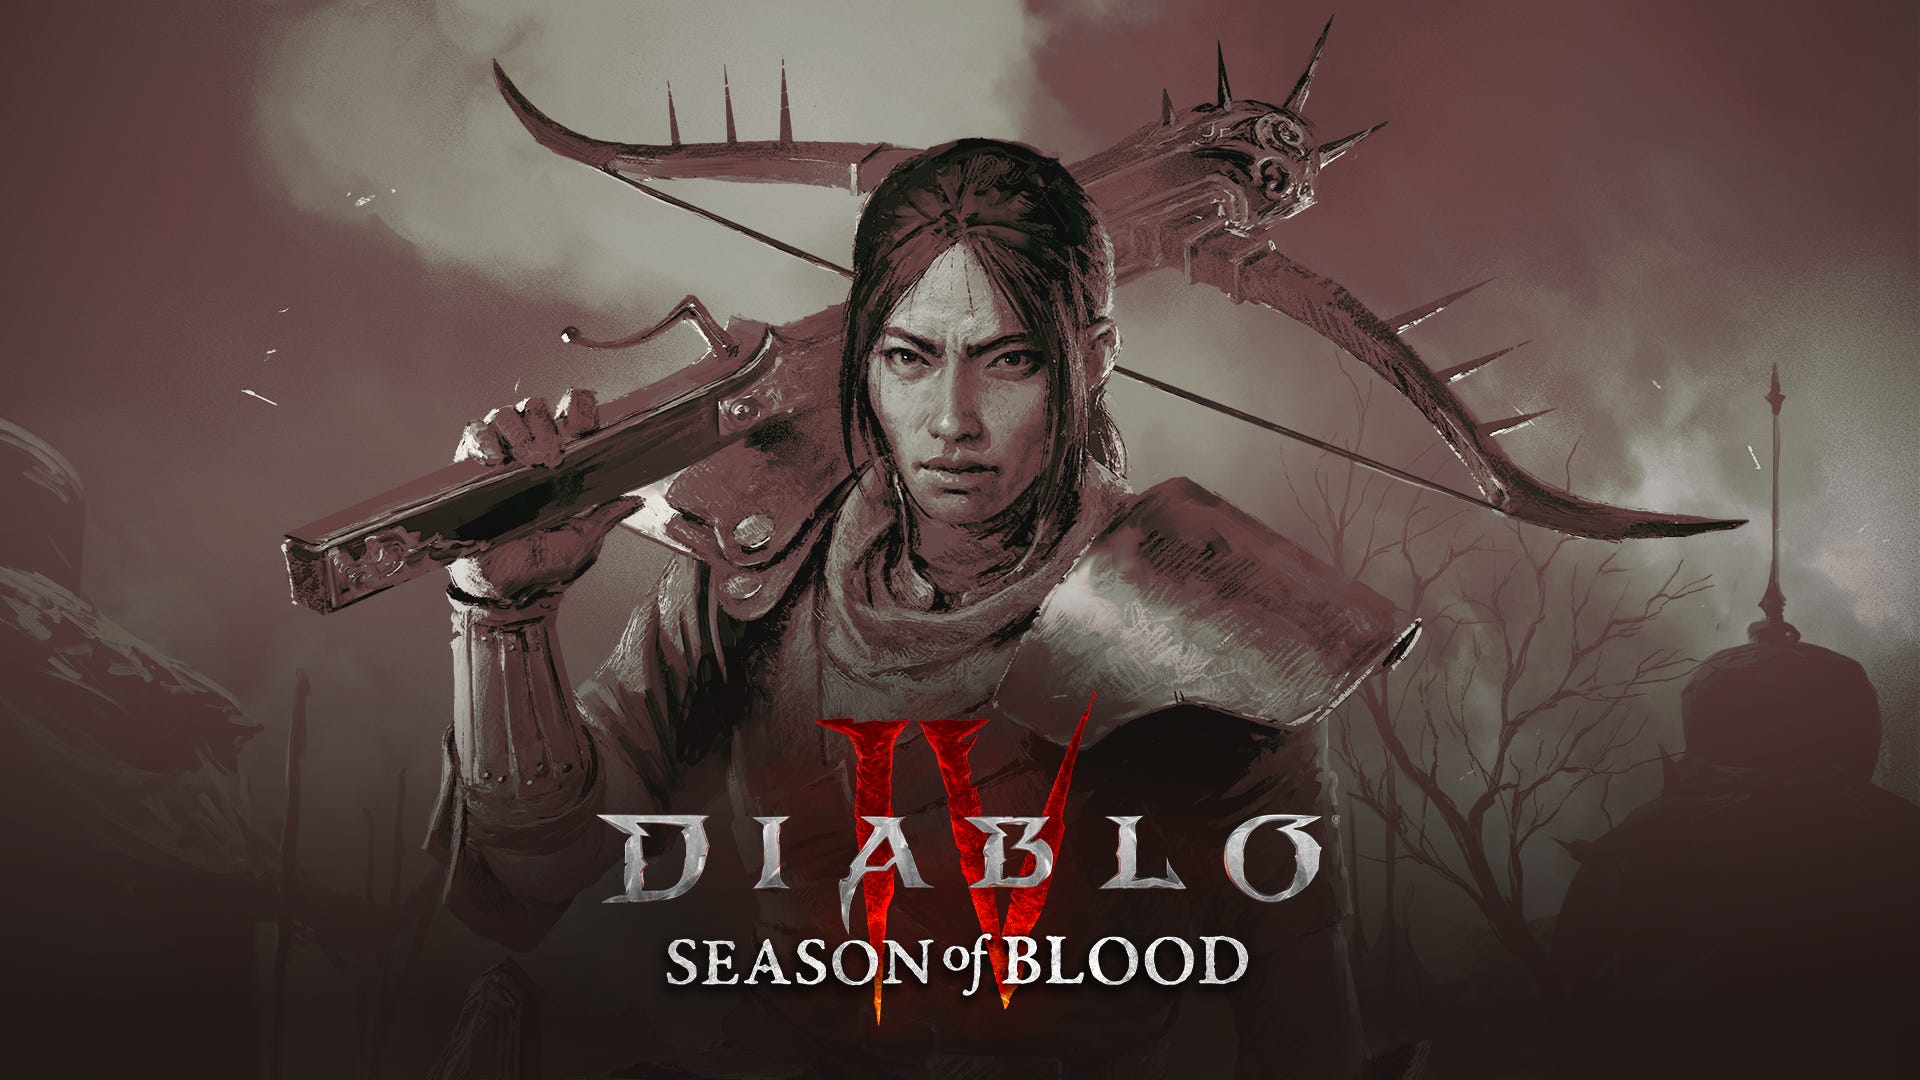 Diablo IV Season of Blood Launches On 18 October AEDT With Sweeping Quality-Of-Life Updates – Diablo IV Coming To Steam On 18 October AEDT